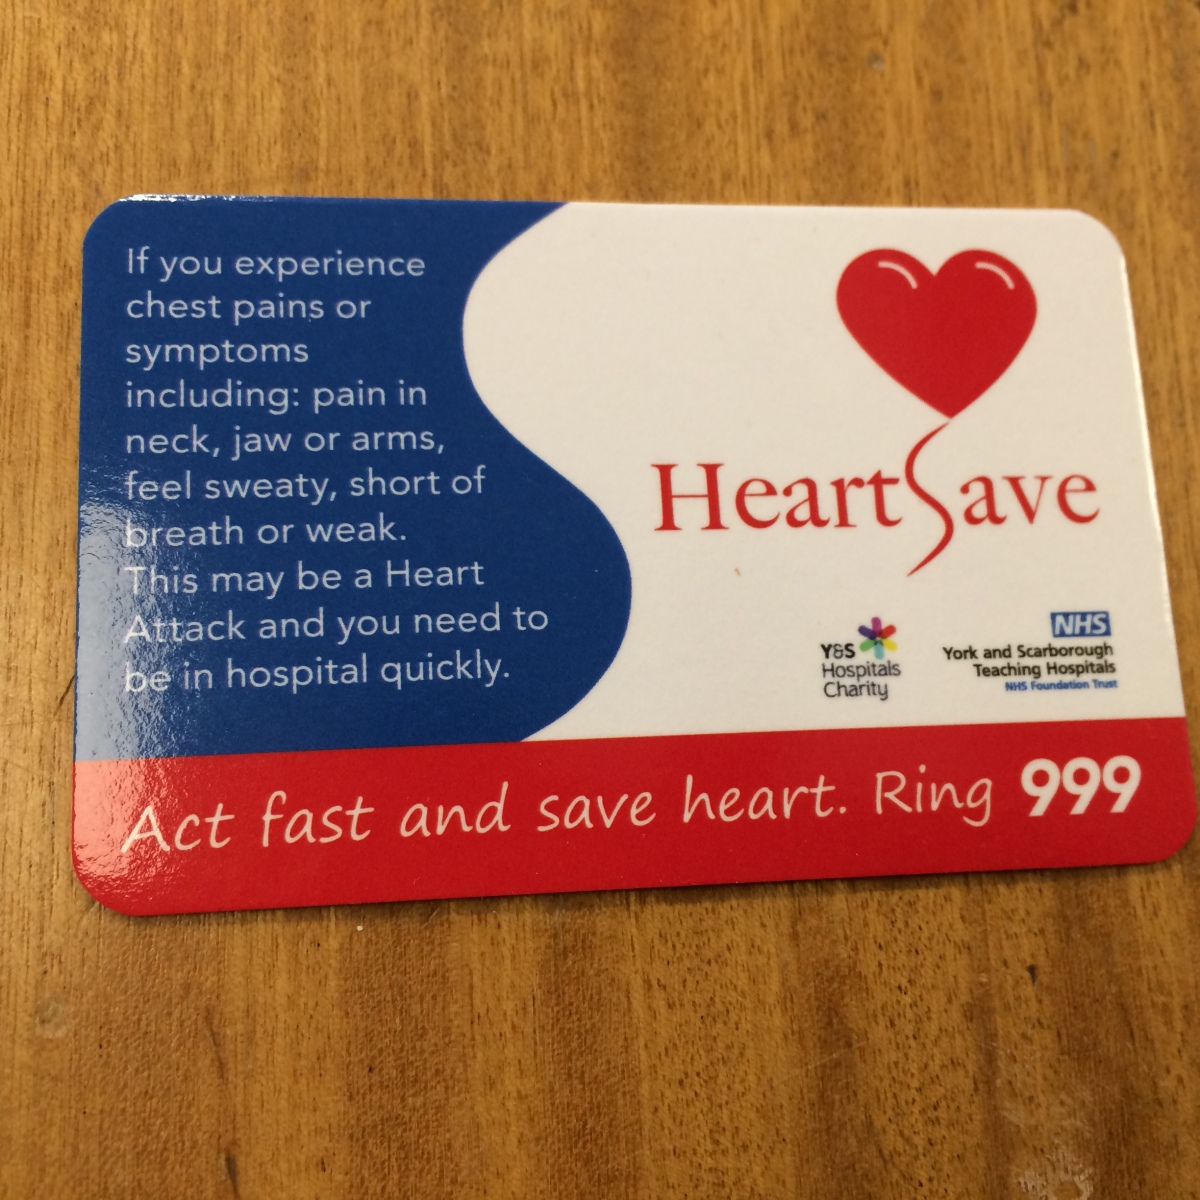 Heart save cards